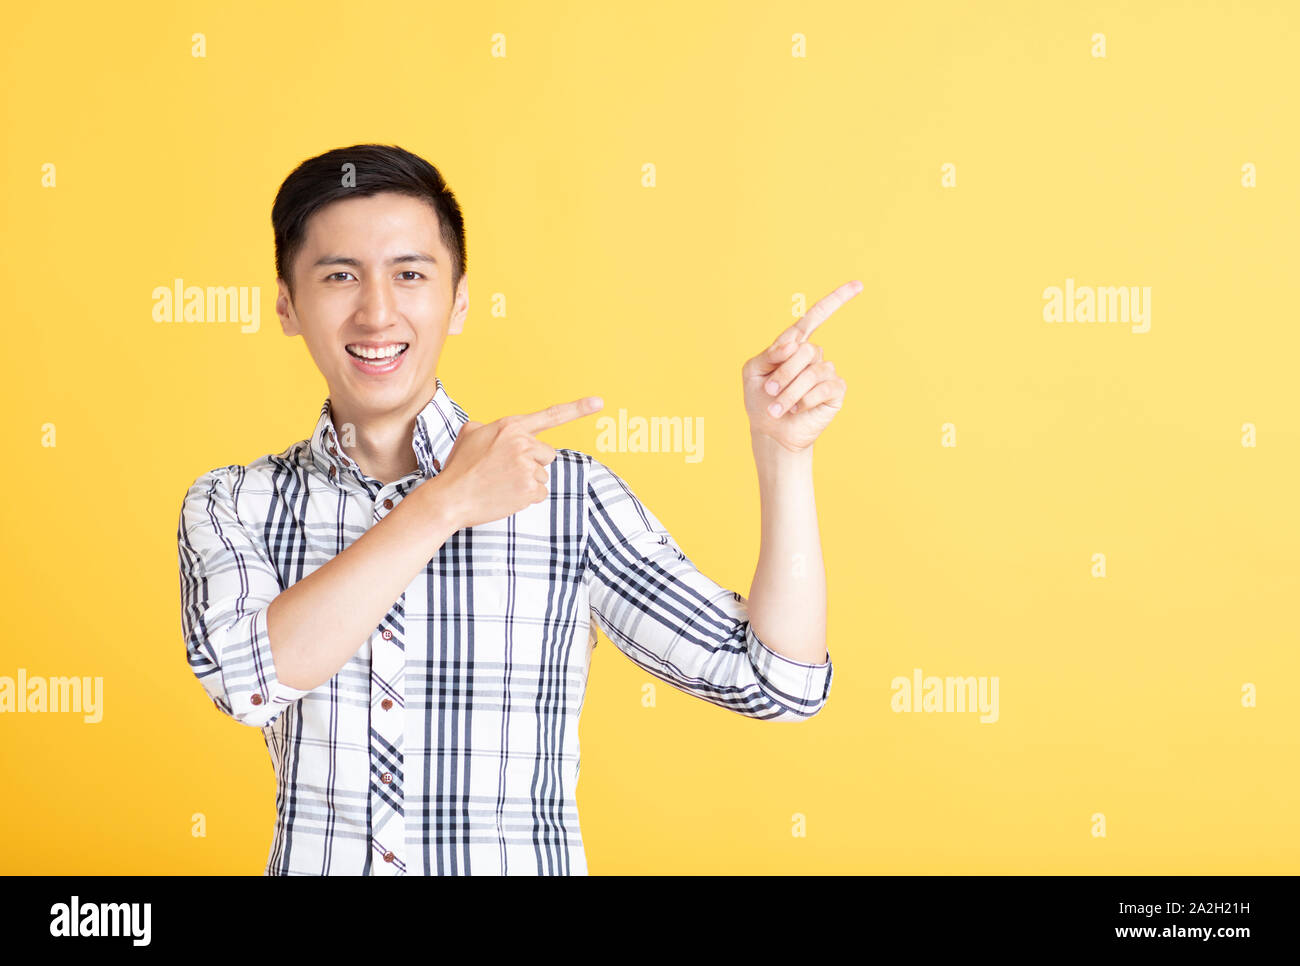 handsome young man pointing and showing Stock Photo